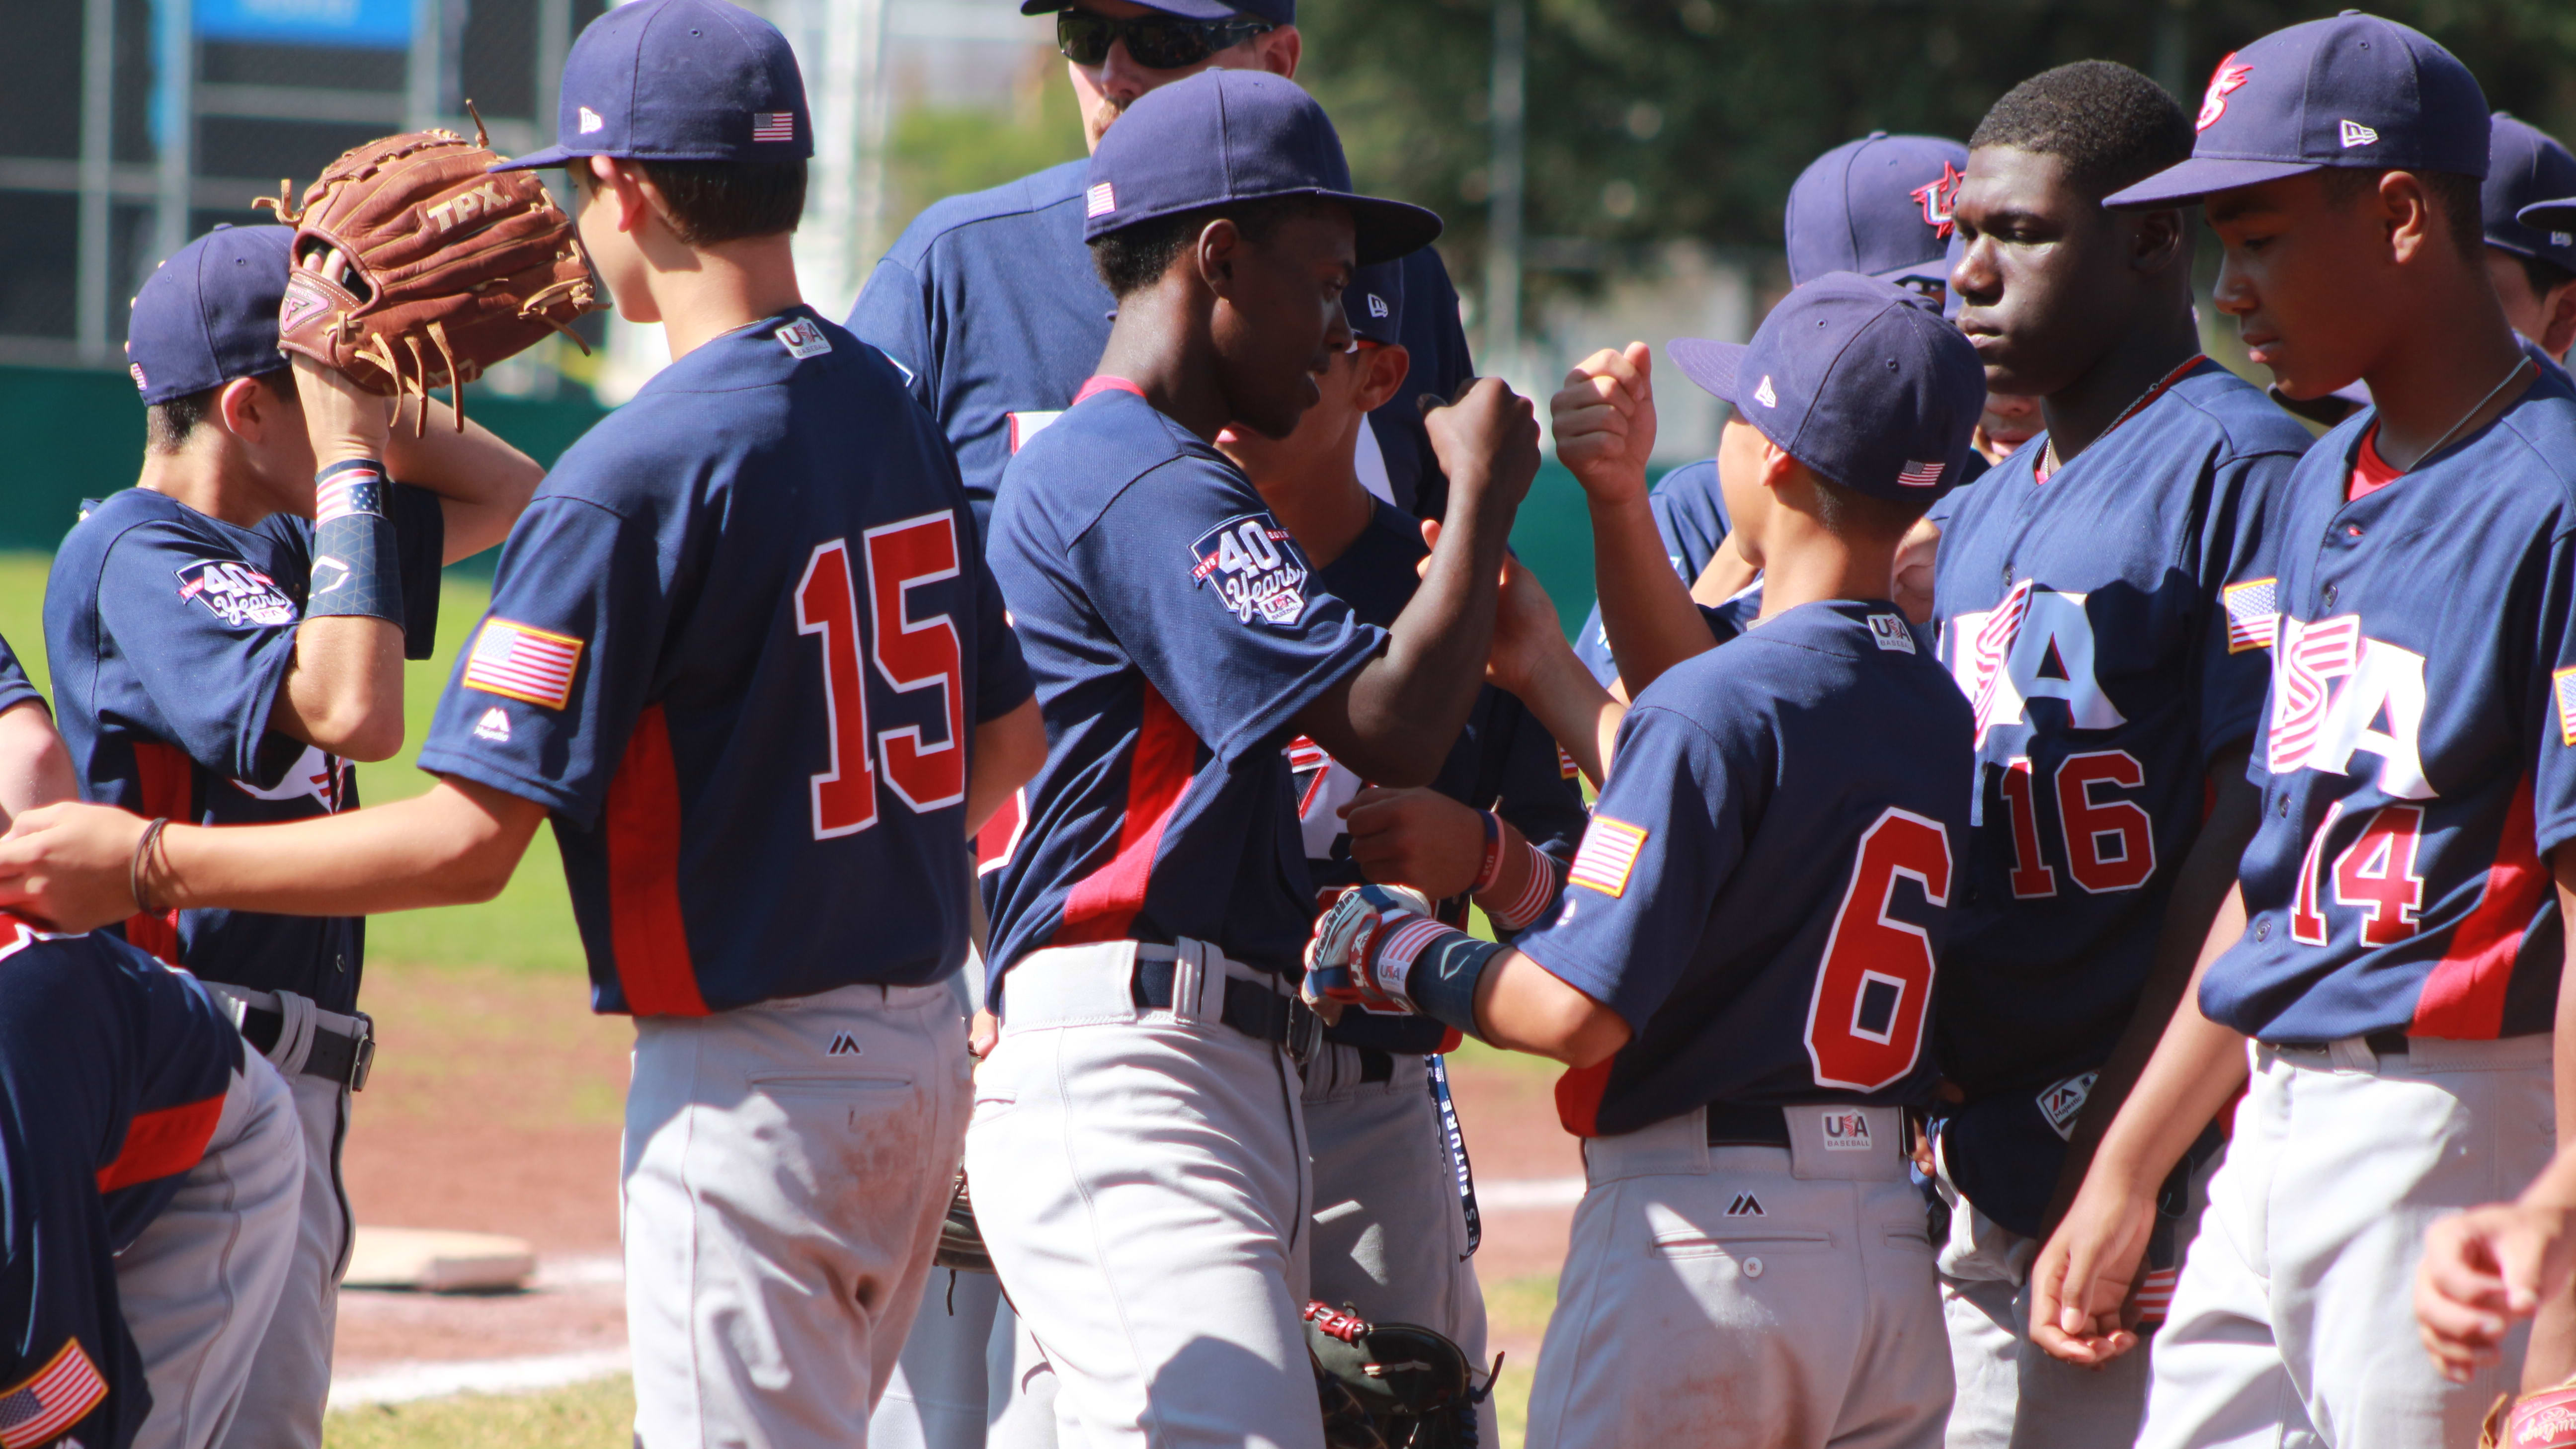 New Albany, trailing 4-3, loses Little League World Series match